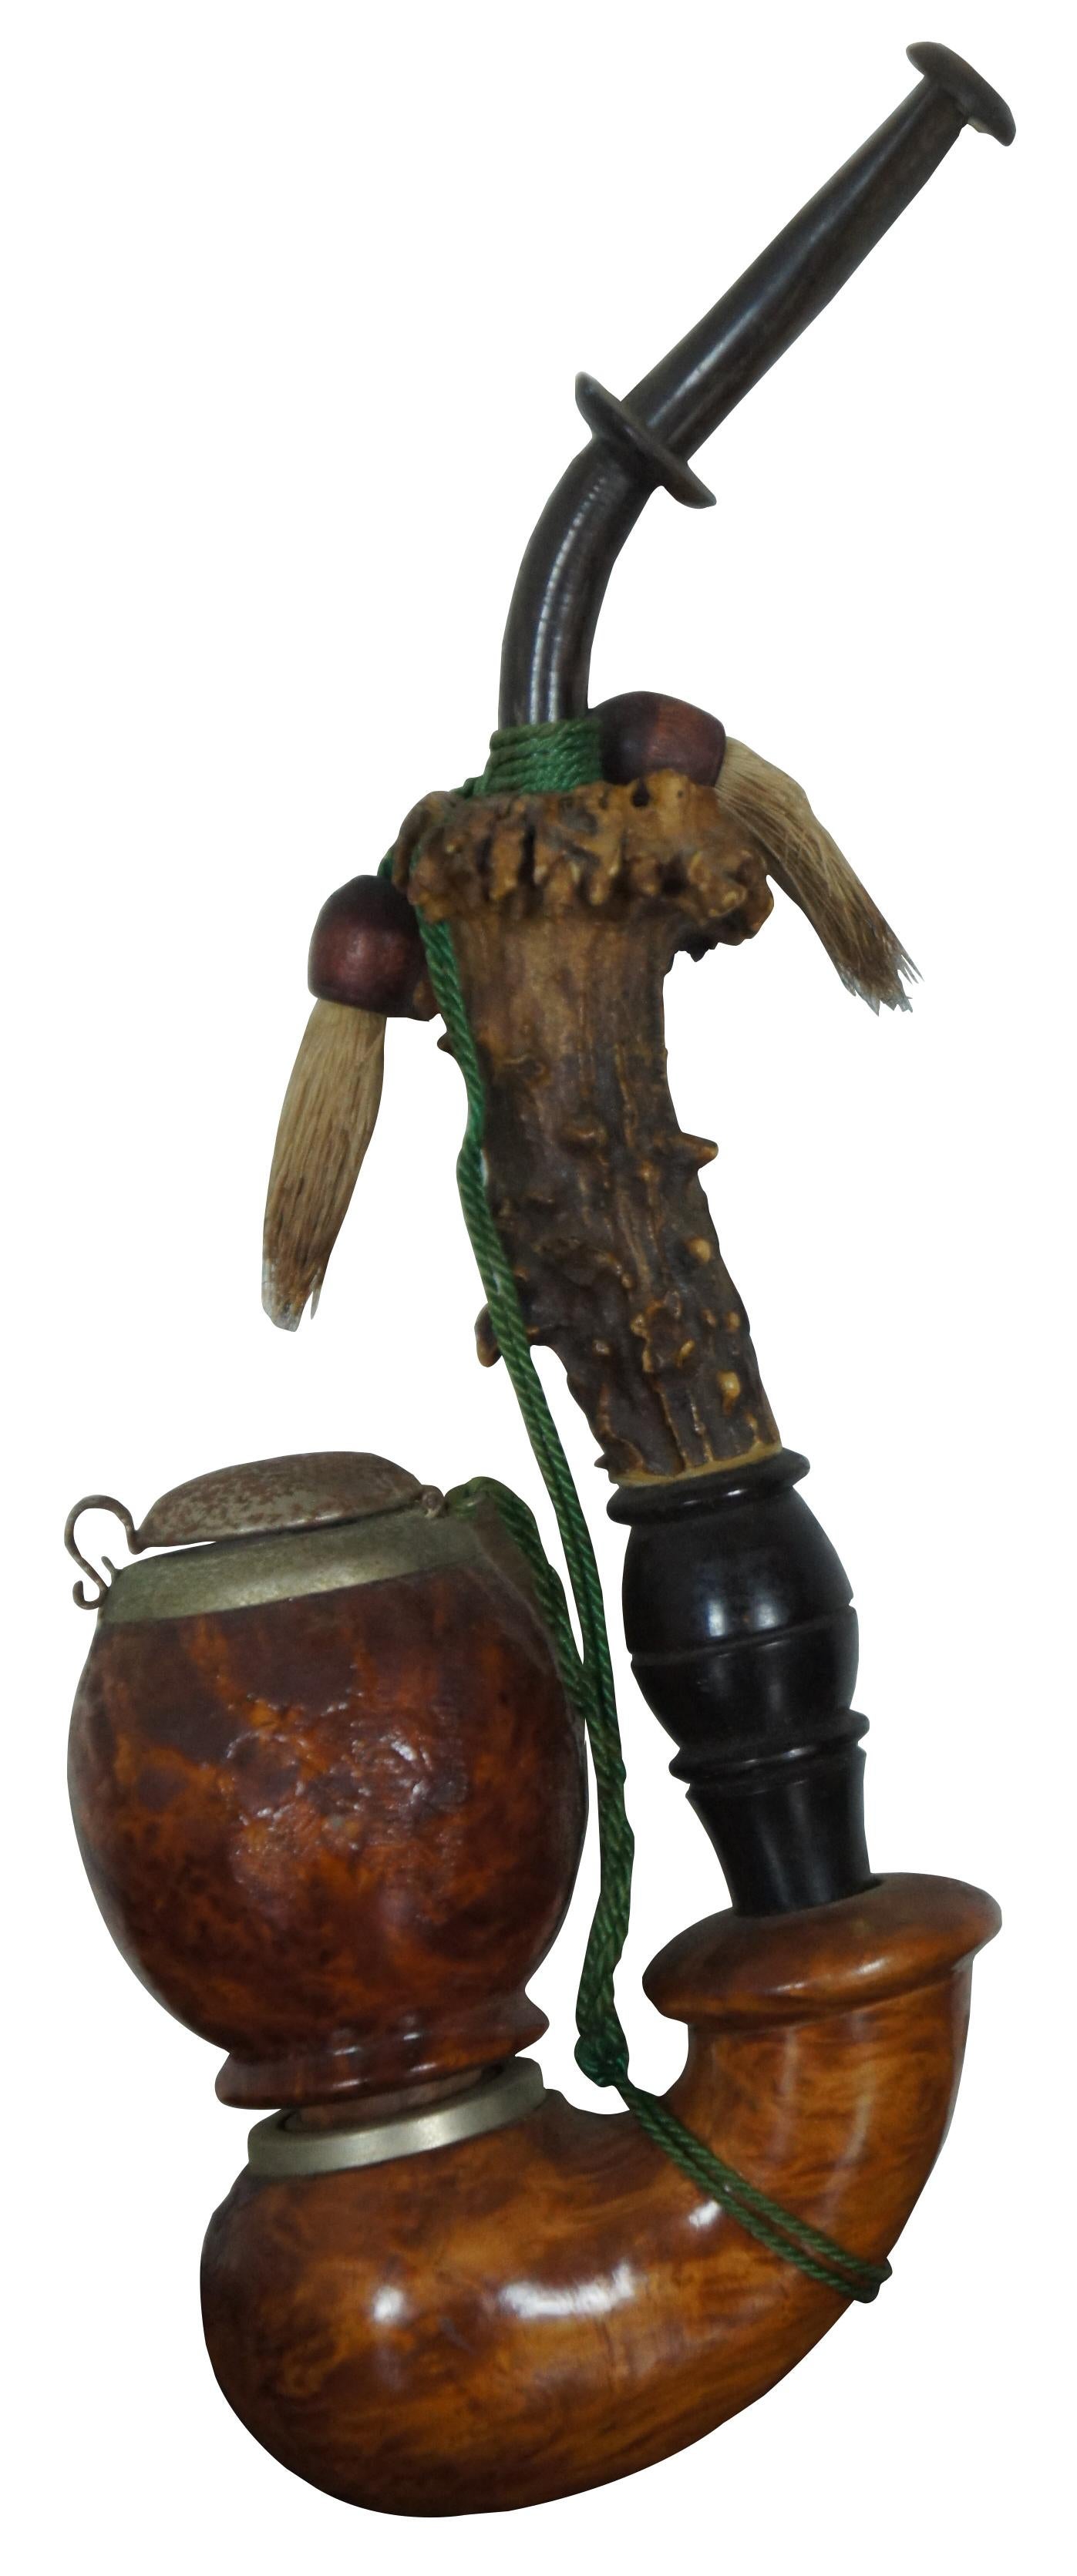 Vintage German smoking pipe fashions with a raw buck horn / antler stem and a round burl wood bowl with metal cap.
      